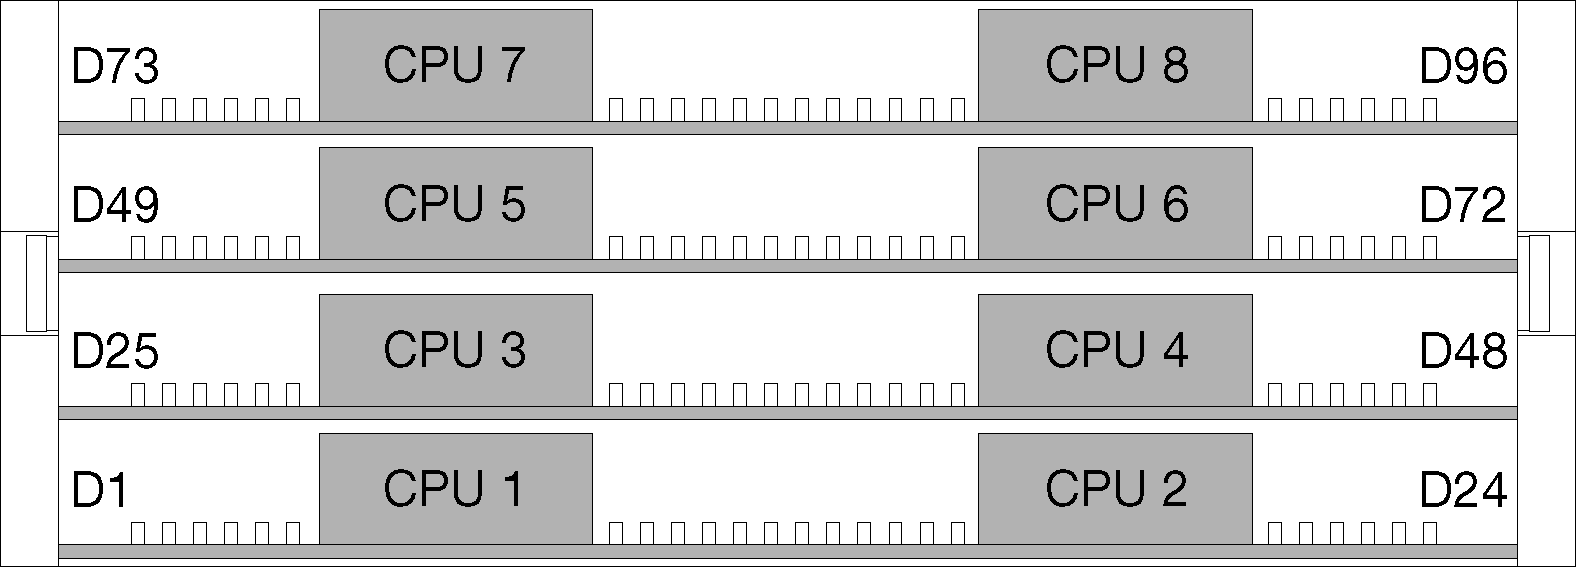 CPU layout for multiple-processor systems